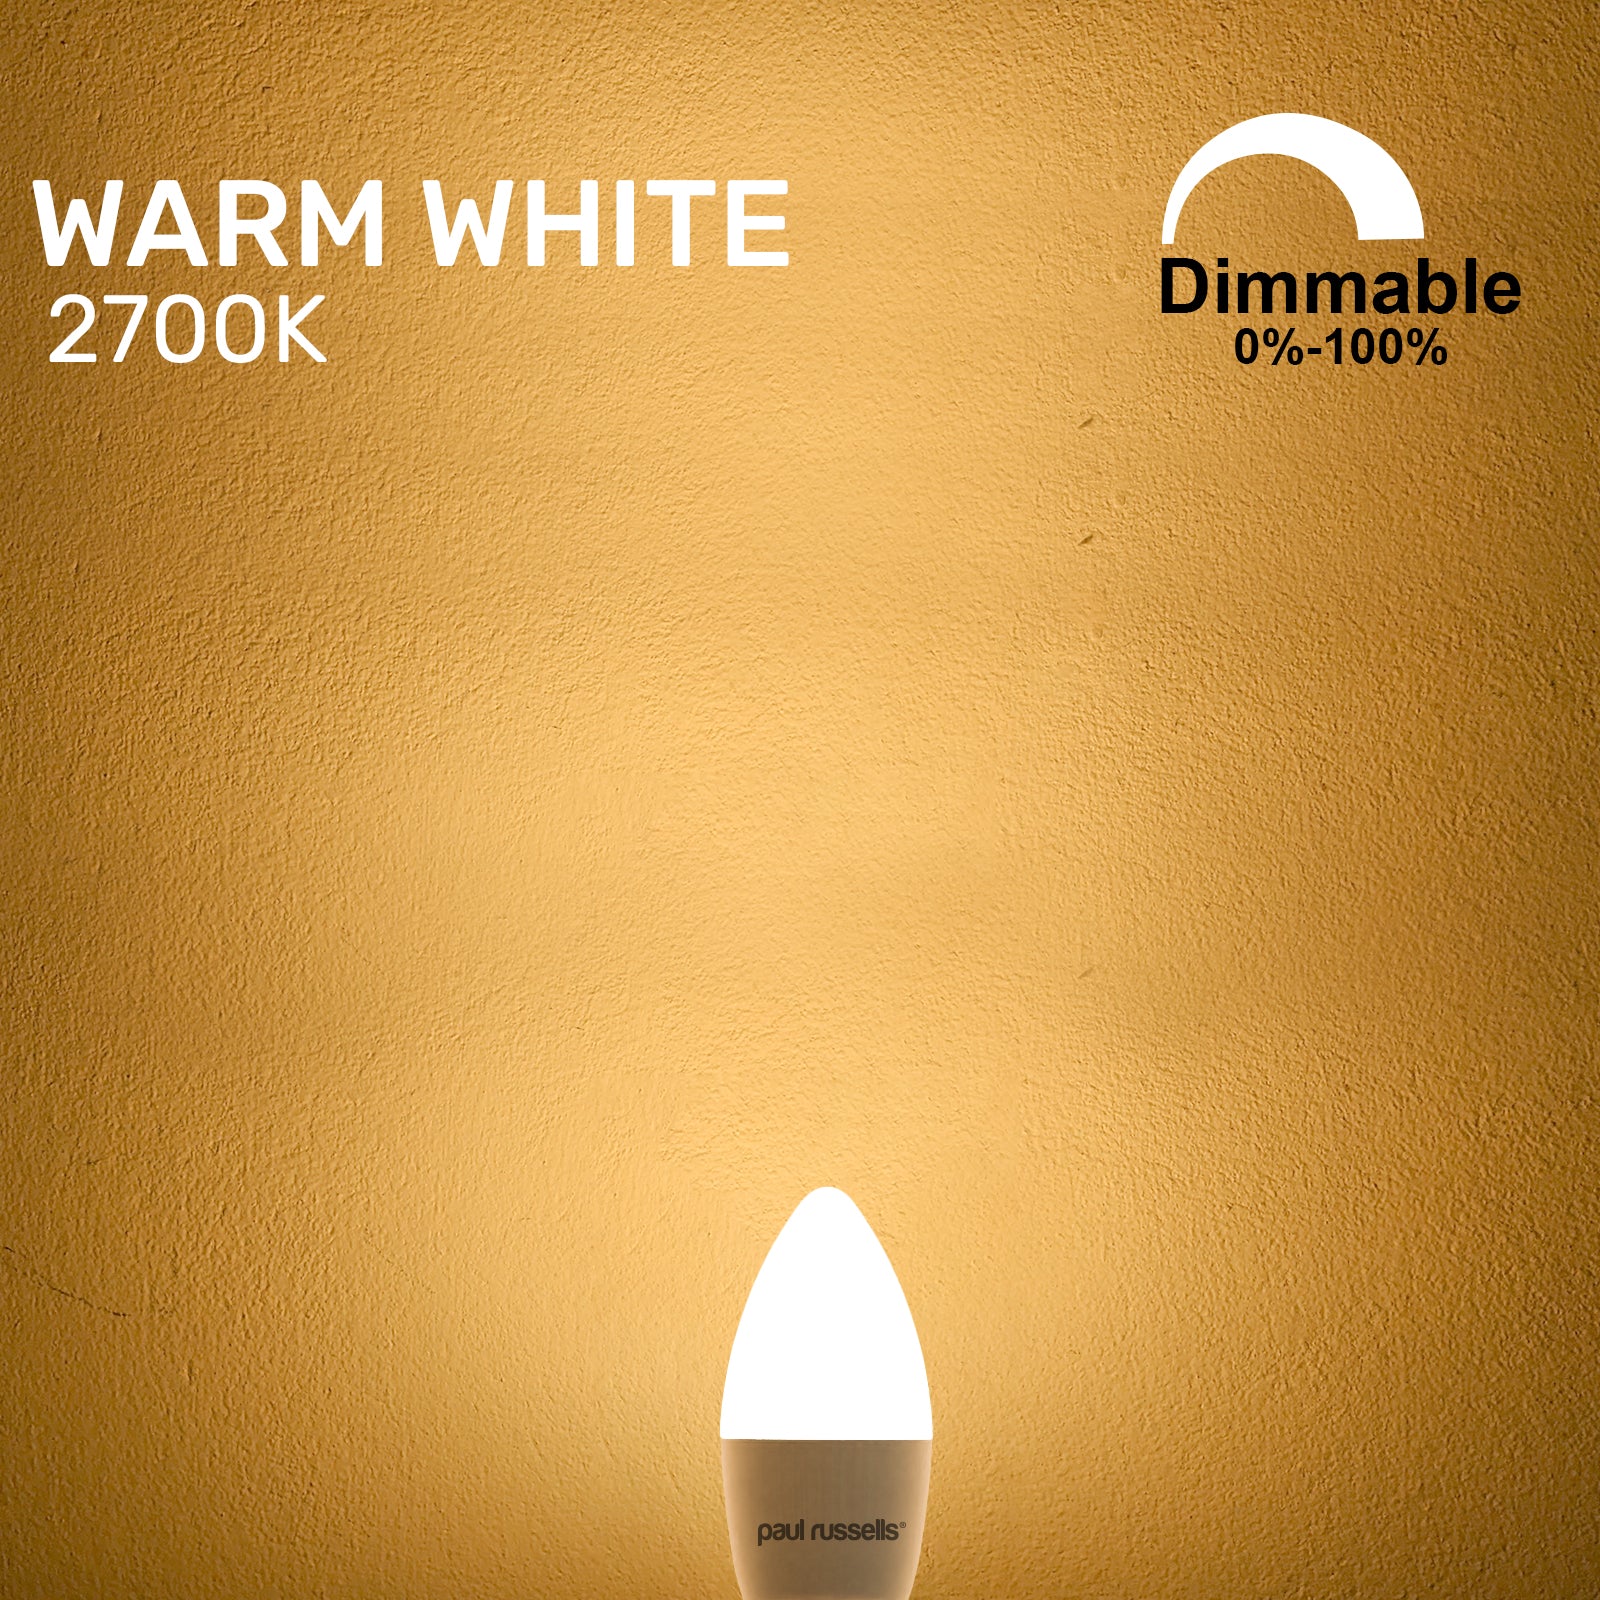 LED Dimmable Candle 5.5W (40w), ES/E27, 470 Lumens, Warm White(2700K), 240V